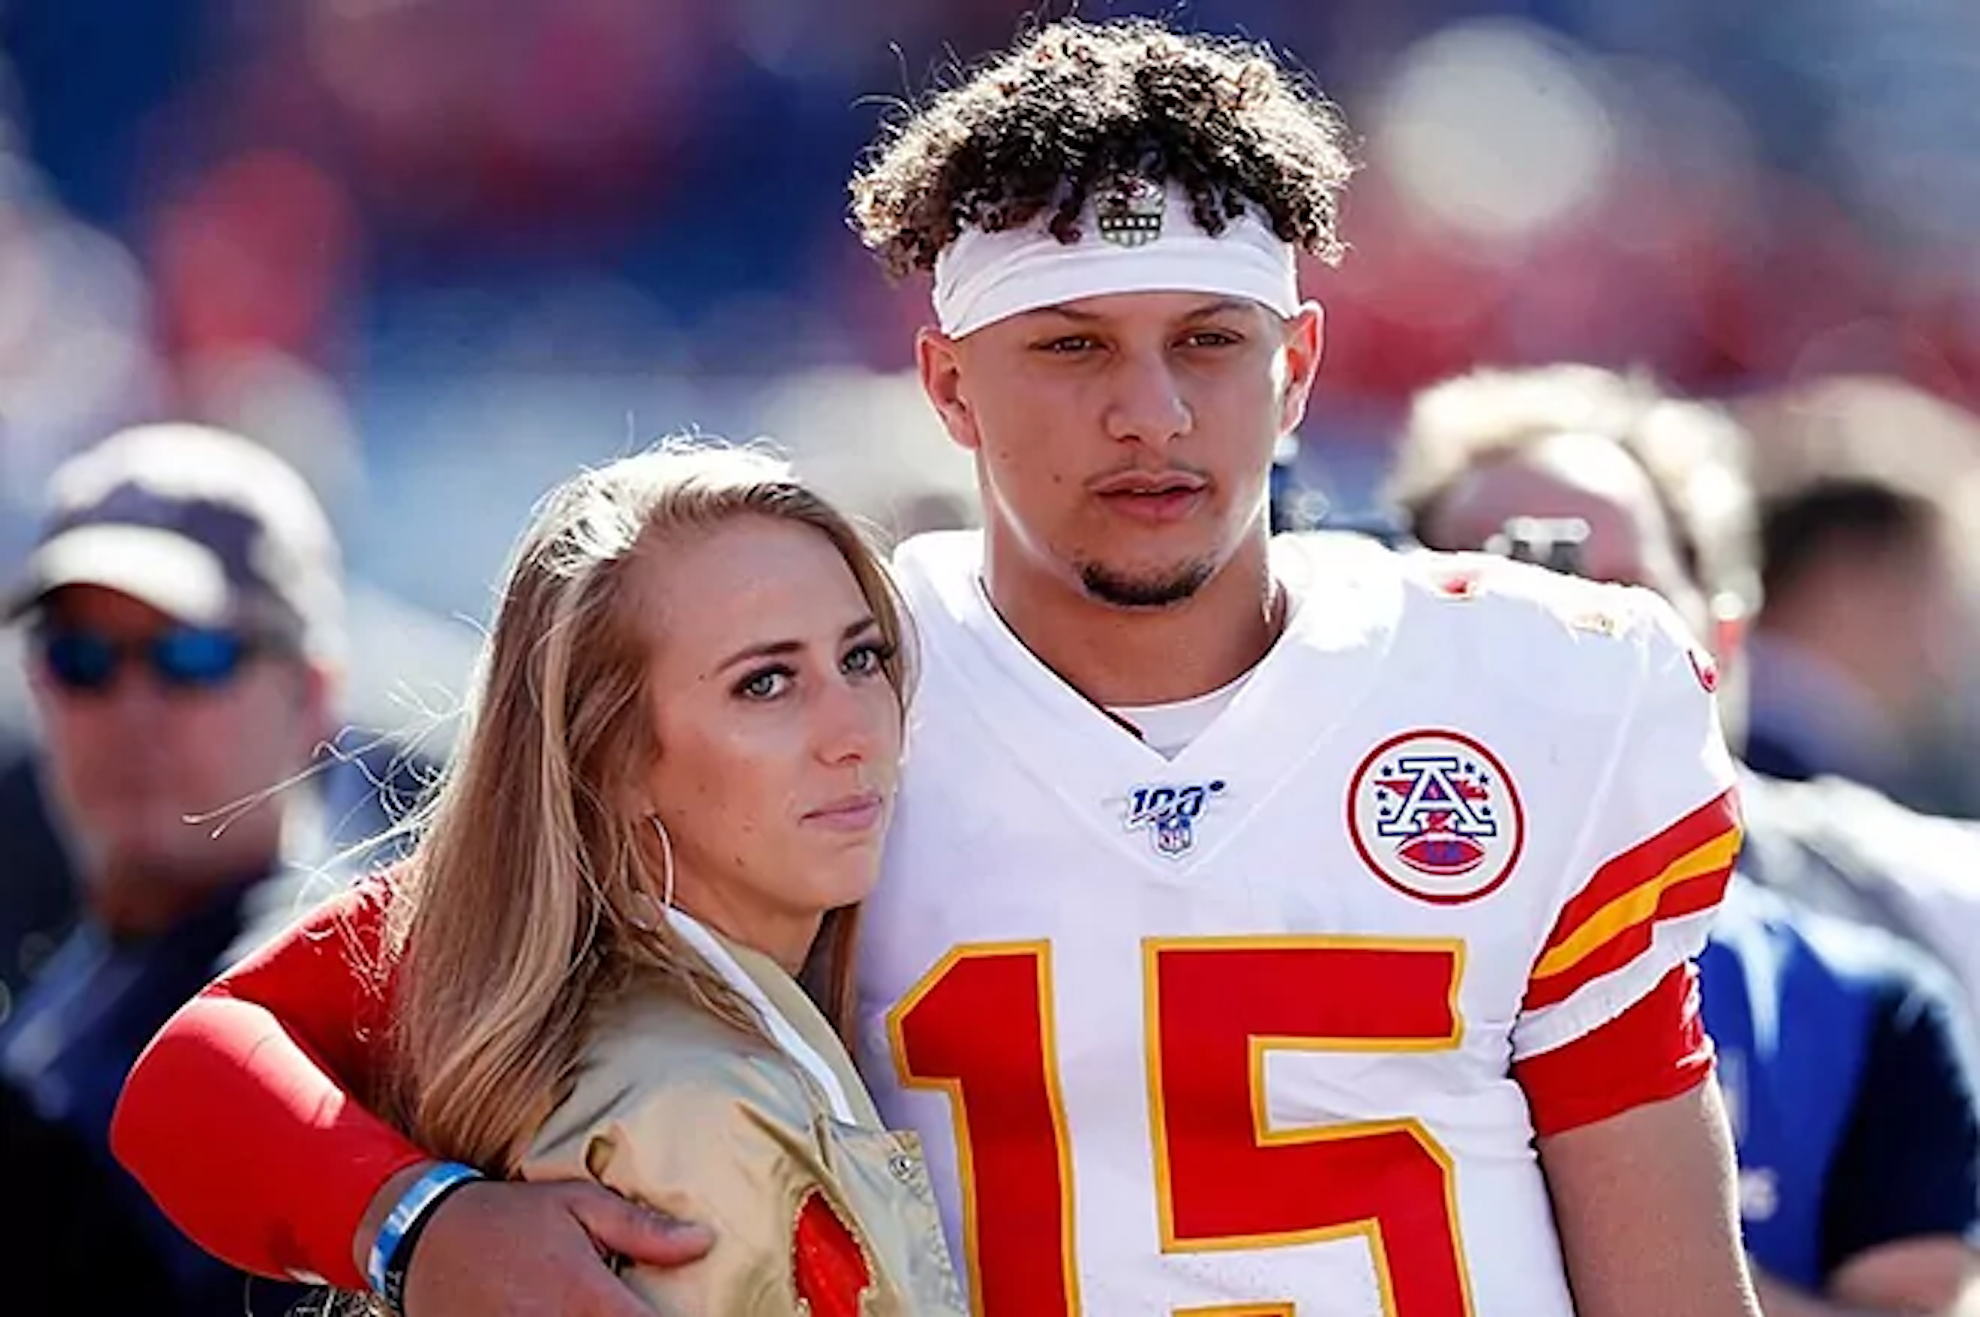 Patrick Mahomes sends a strong message to the Chiefs that makes the Jaguars 'shudder'